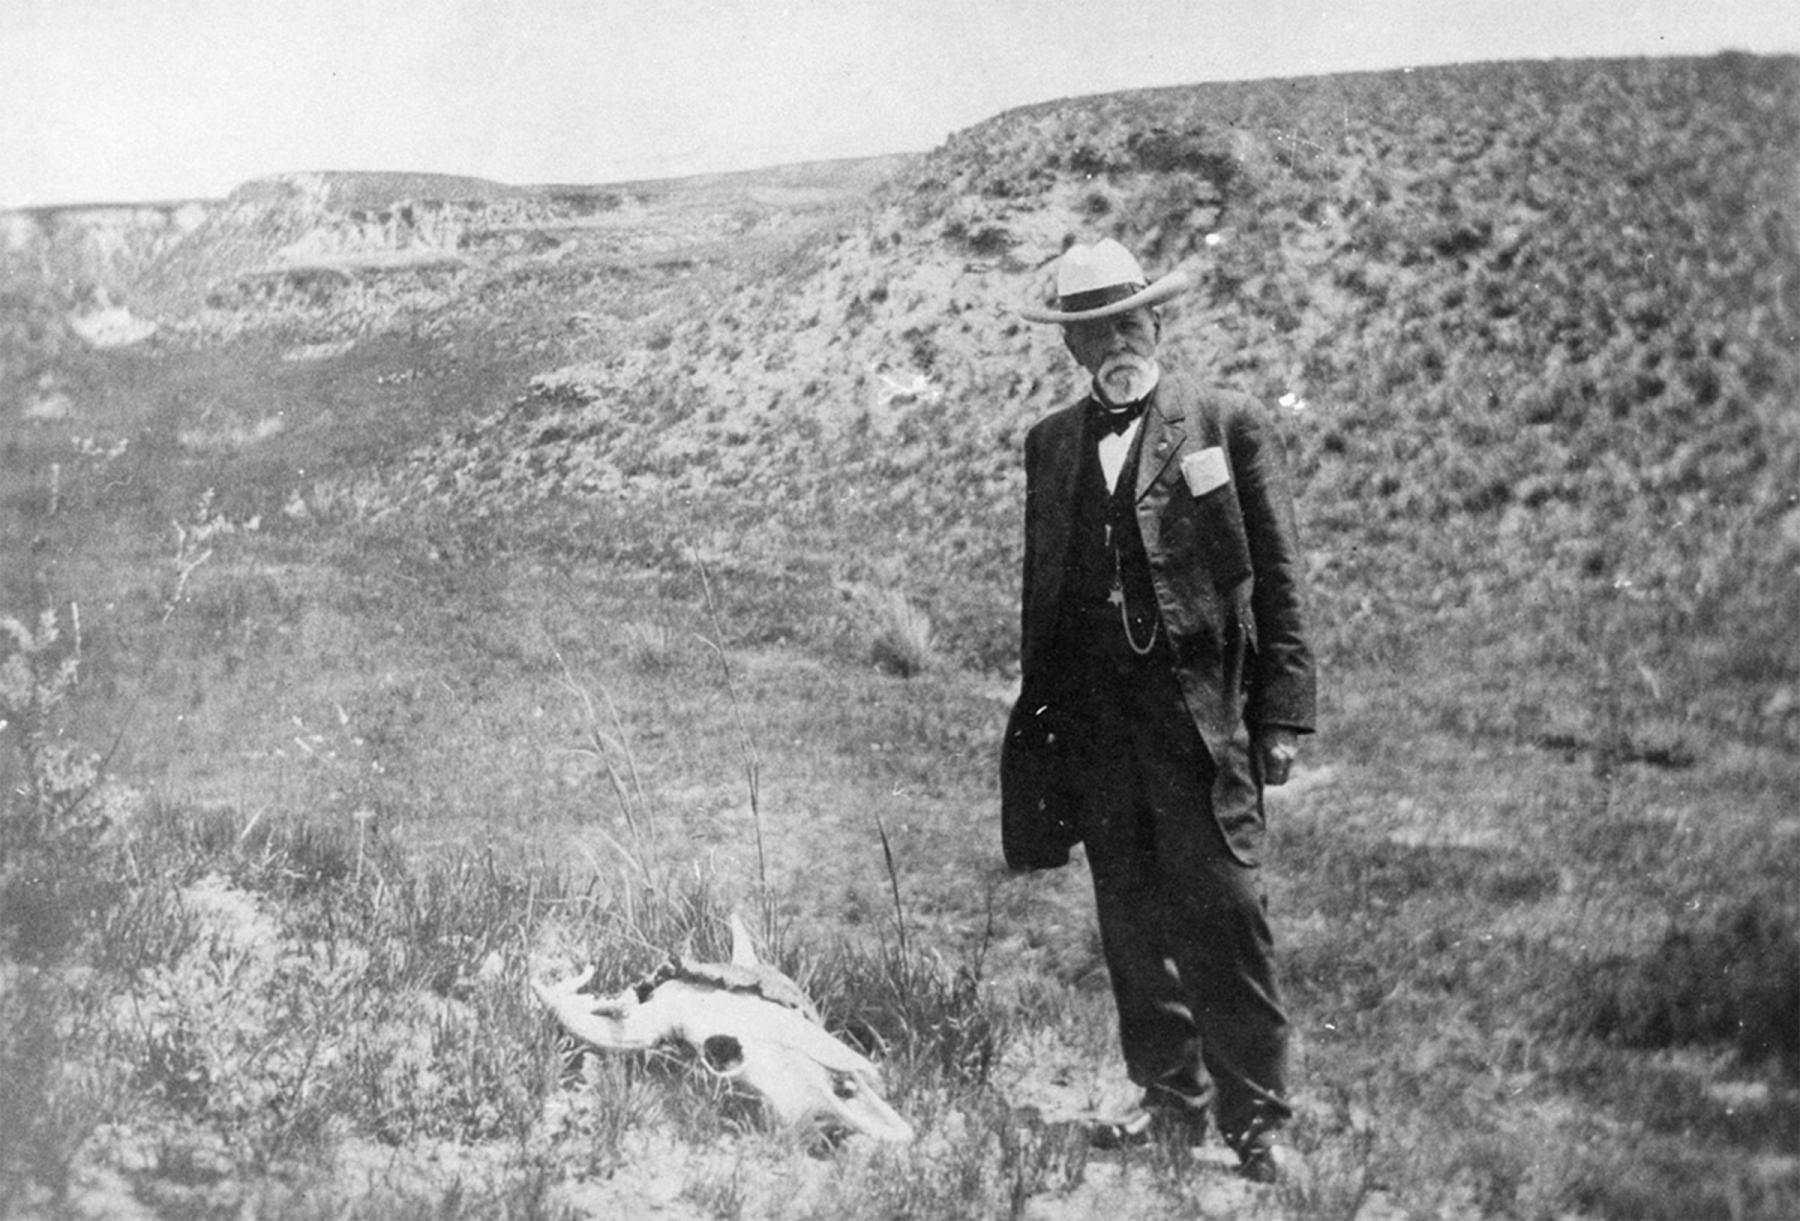 Key to the 1906 passage of the Antiquities Act was Republican Rep. John Lacey of Texas, chairman of the House Public Lands Committee. For every bill he backed for conserving public lands, he backed another for developing them. It worked. Here, he contemplates a bison skull that year in Texas. Boone and Crockett Club. 